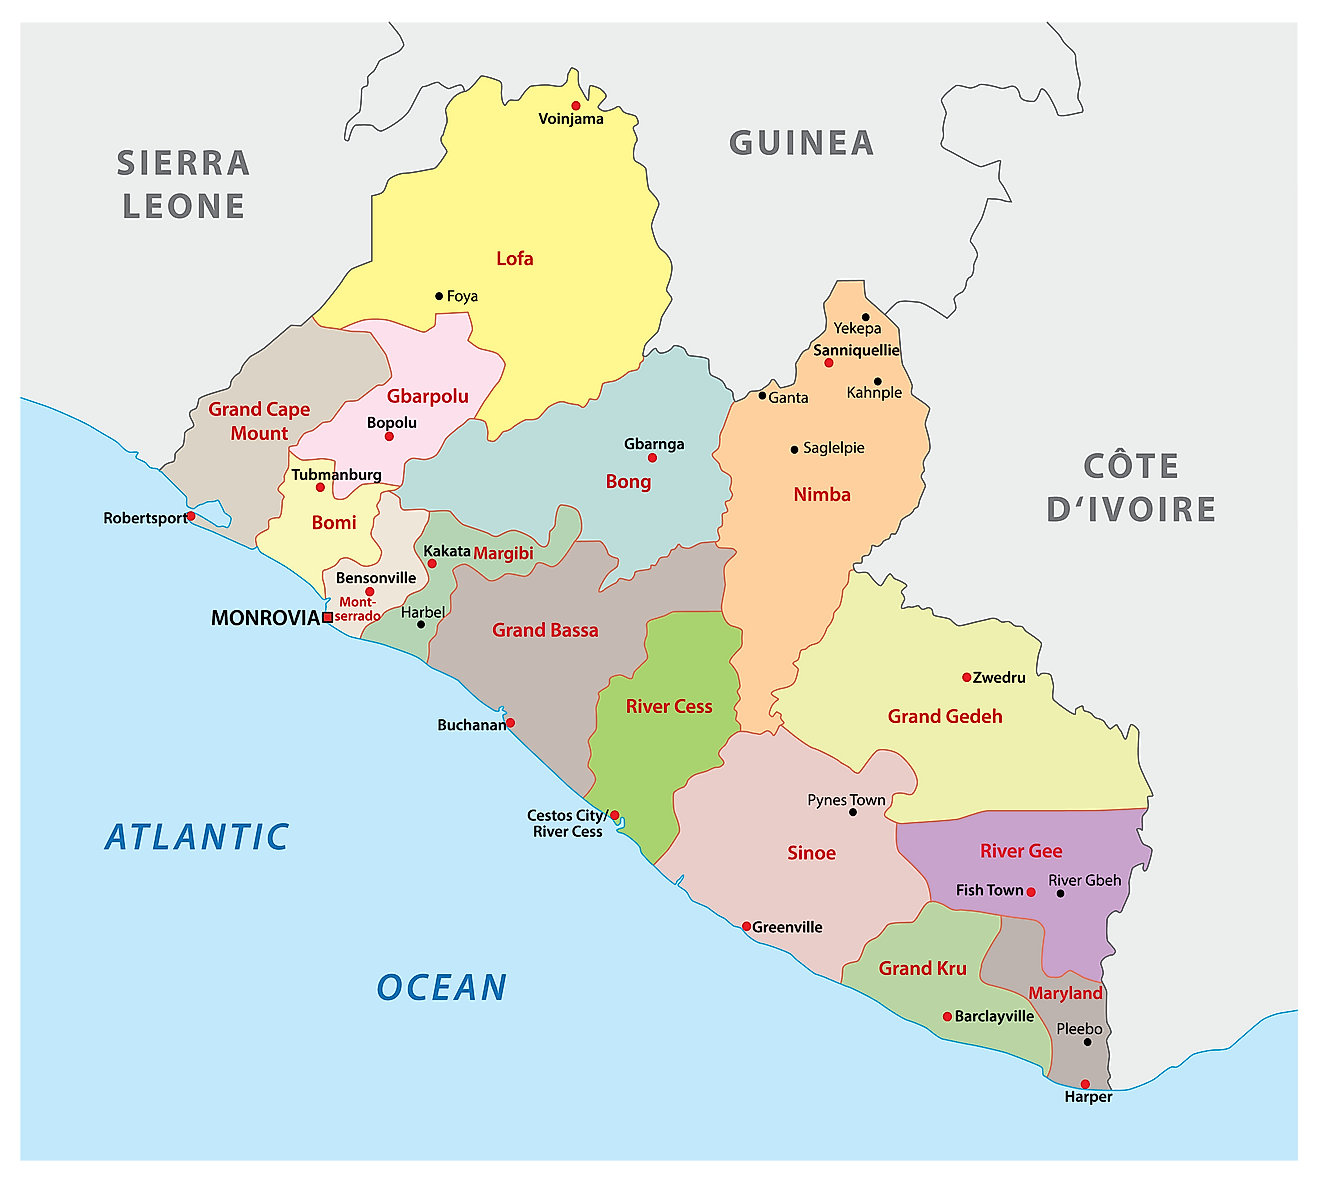 The Political Map of Liberia showing the 15 counties, their capitals, and the national capital of Monrovia.